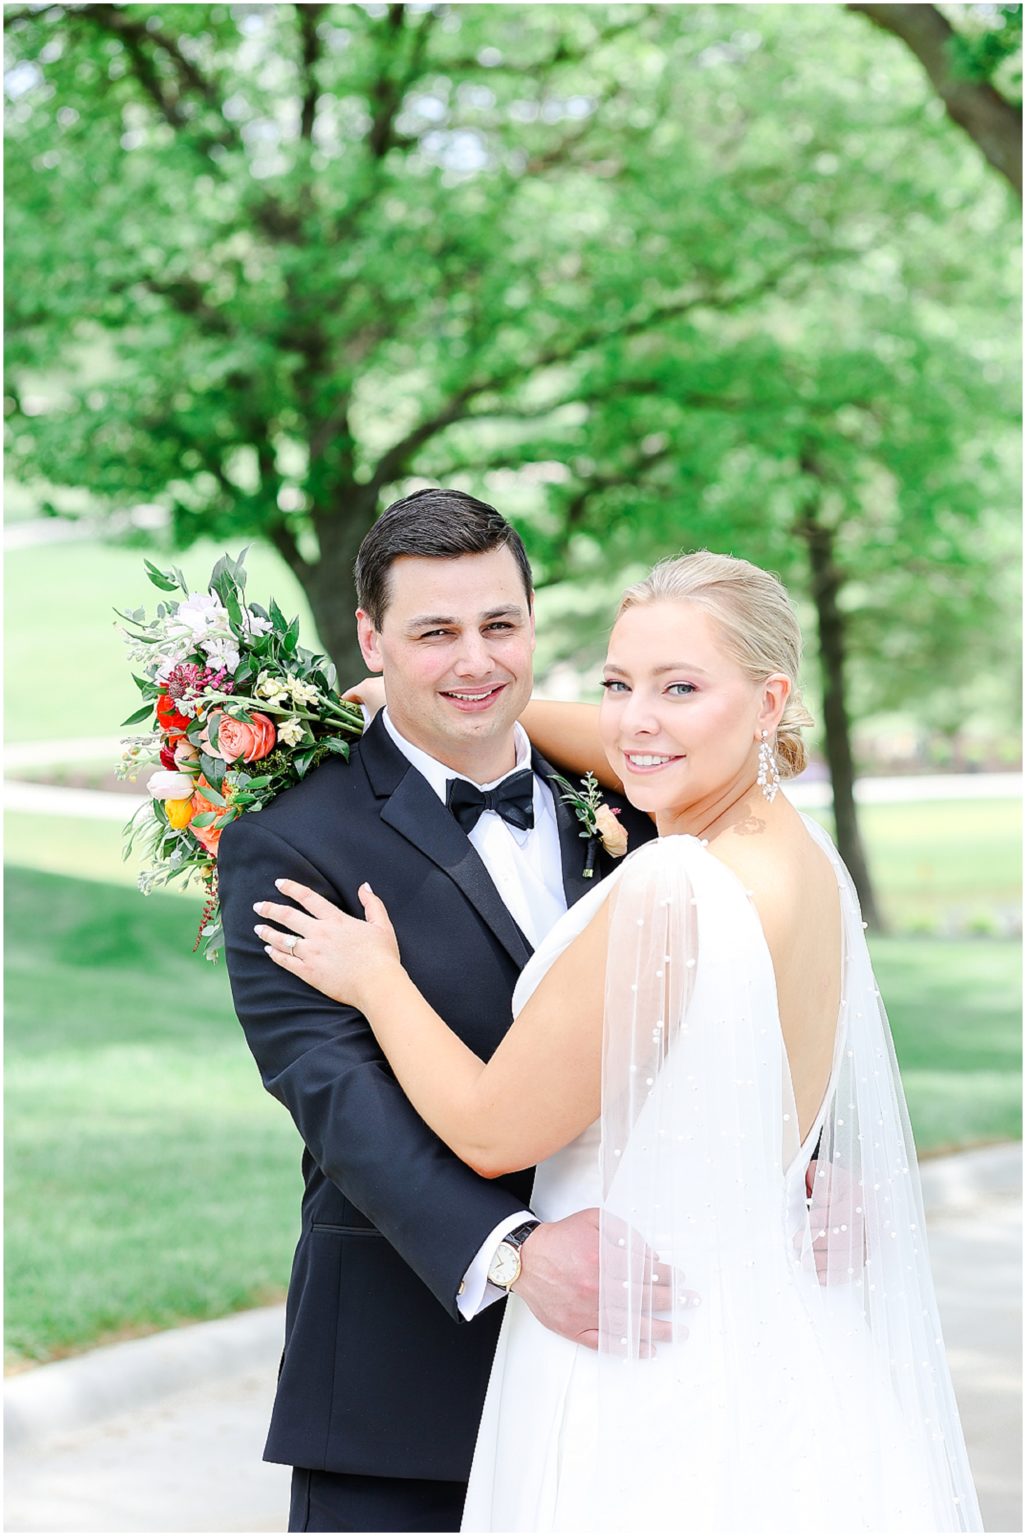 A Classic & Colorful Kansas City Wedding at Oakwood Country Club for ...